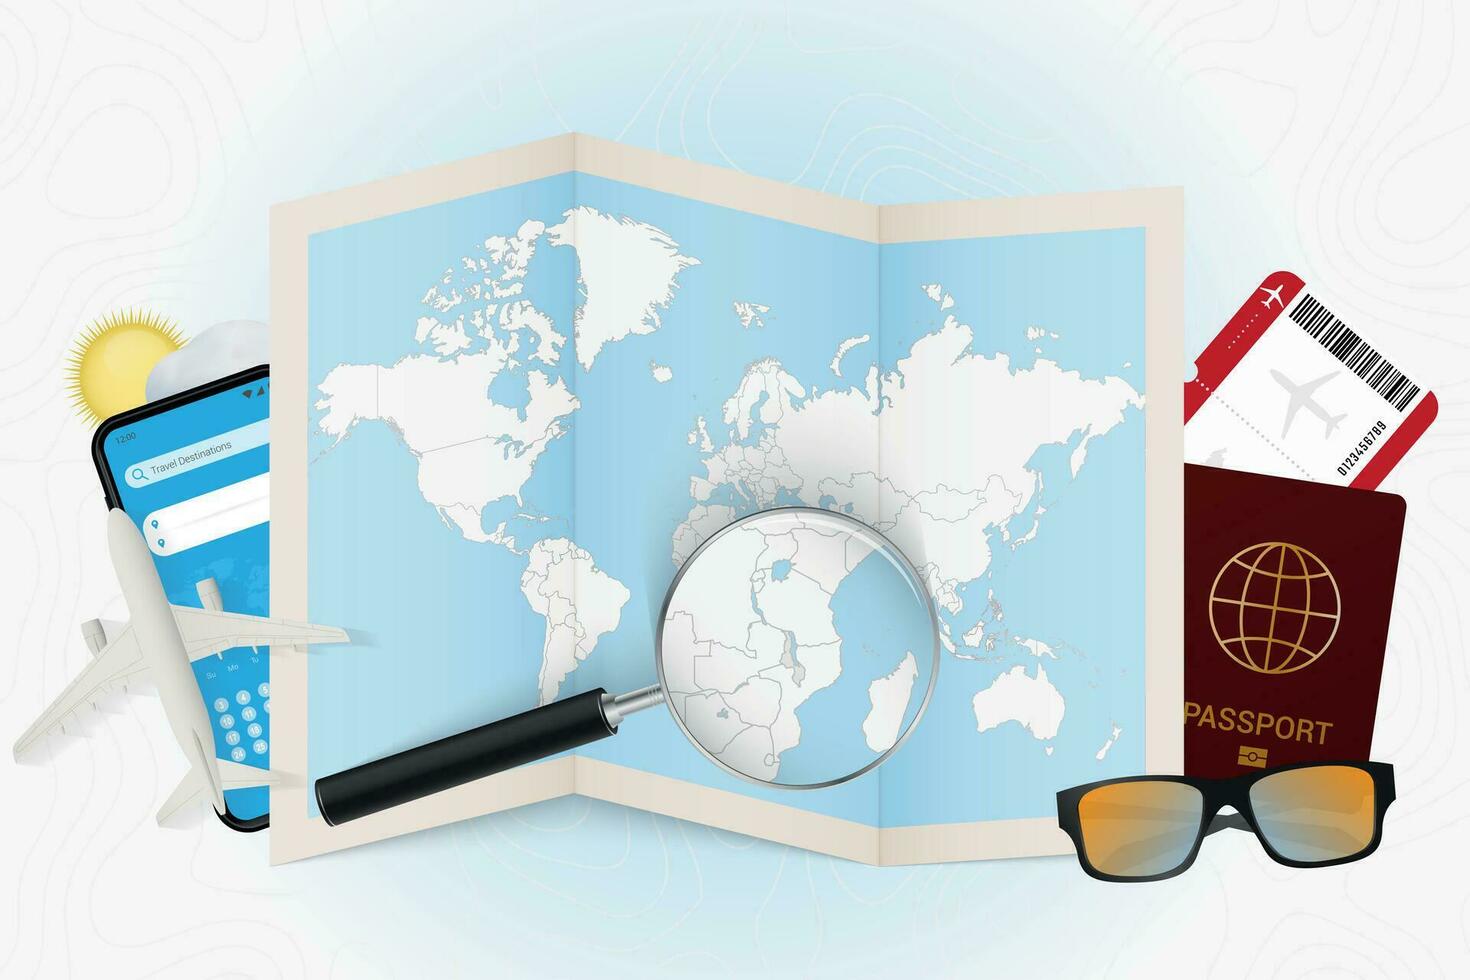 Travel destination Malawi, tourism mockup with travel equipment and world map with magnifying glass on a Malawi. vector